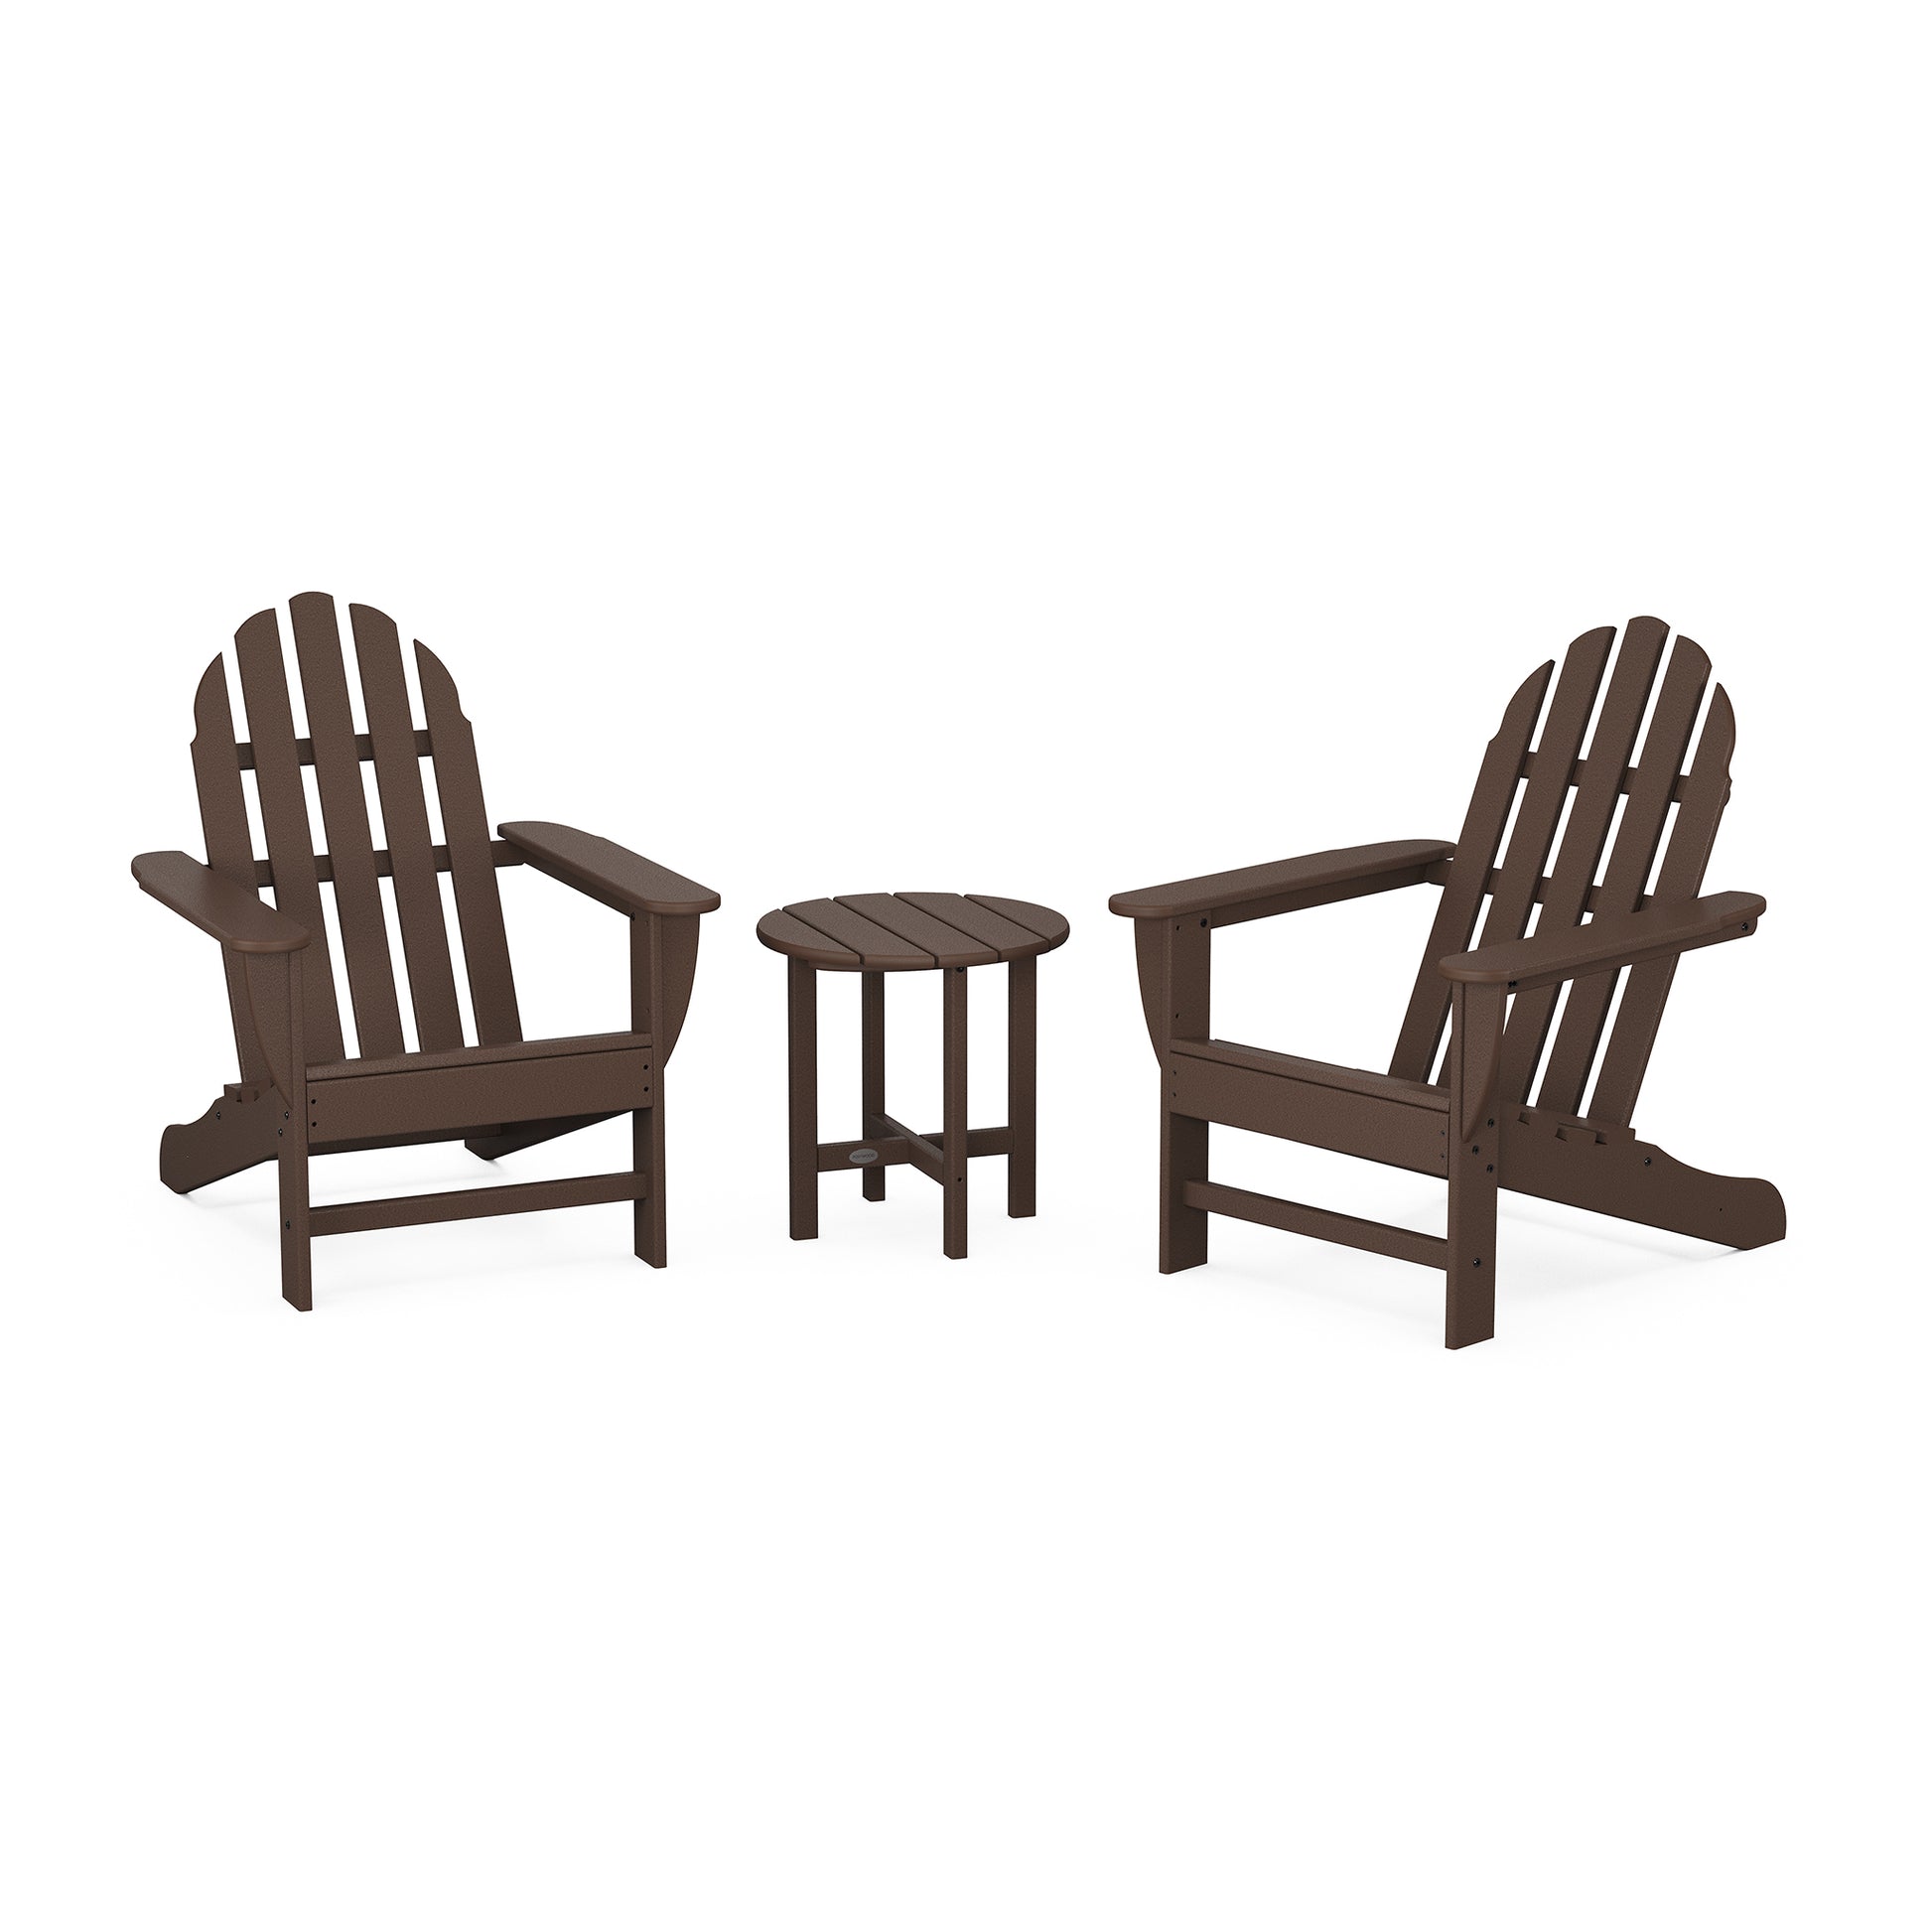 Two brown POLYWOOD Classic Adirondack chairs and a small matching side table on a plain white background.